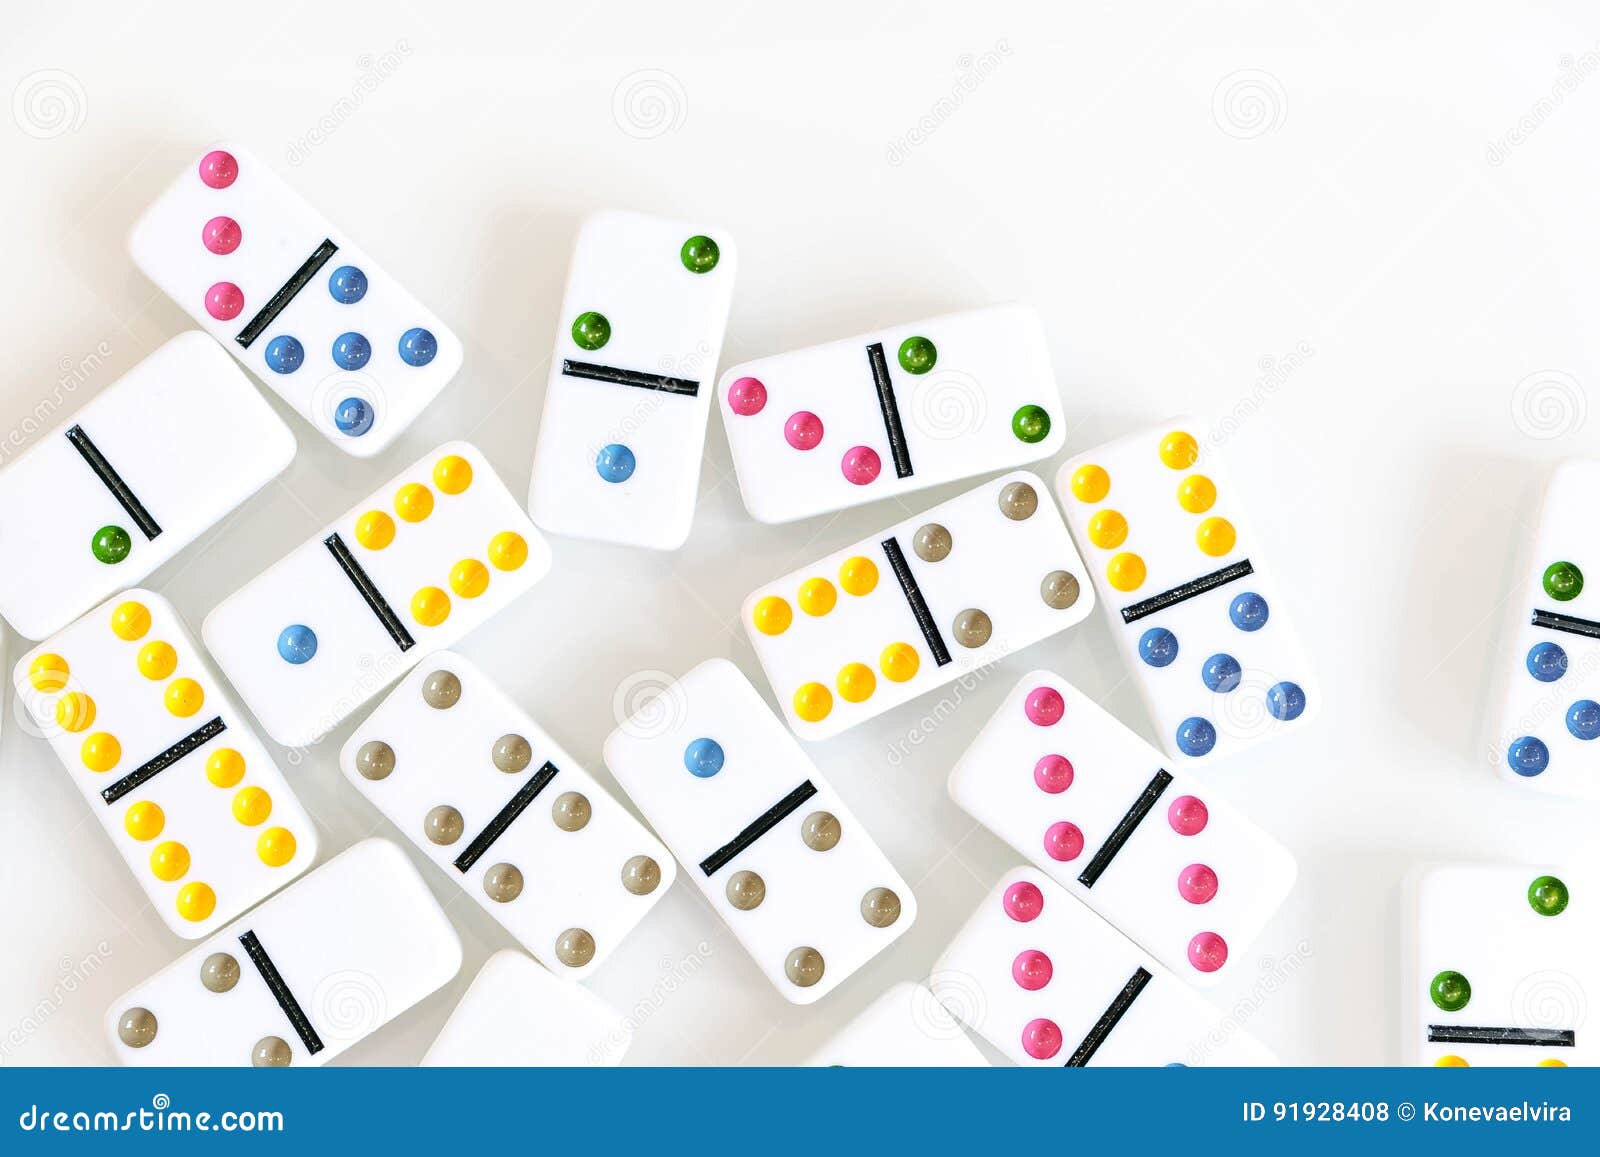 Domino Effect Shot Look Down For Domino Game Dominoes Falling In